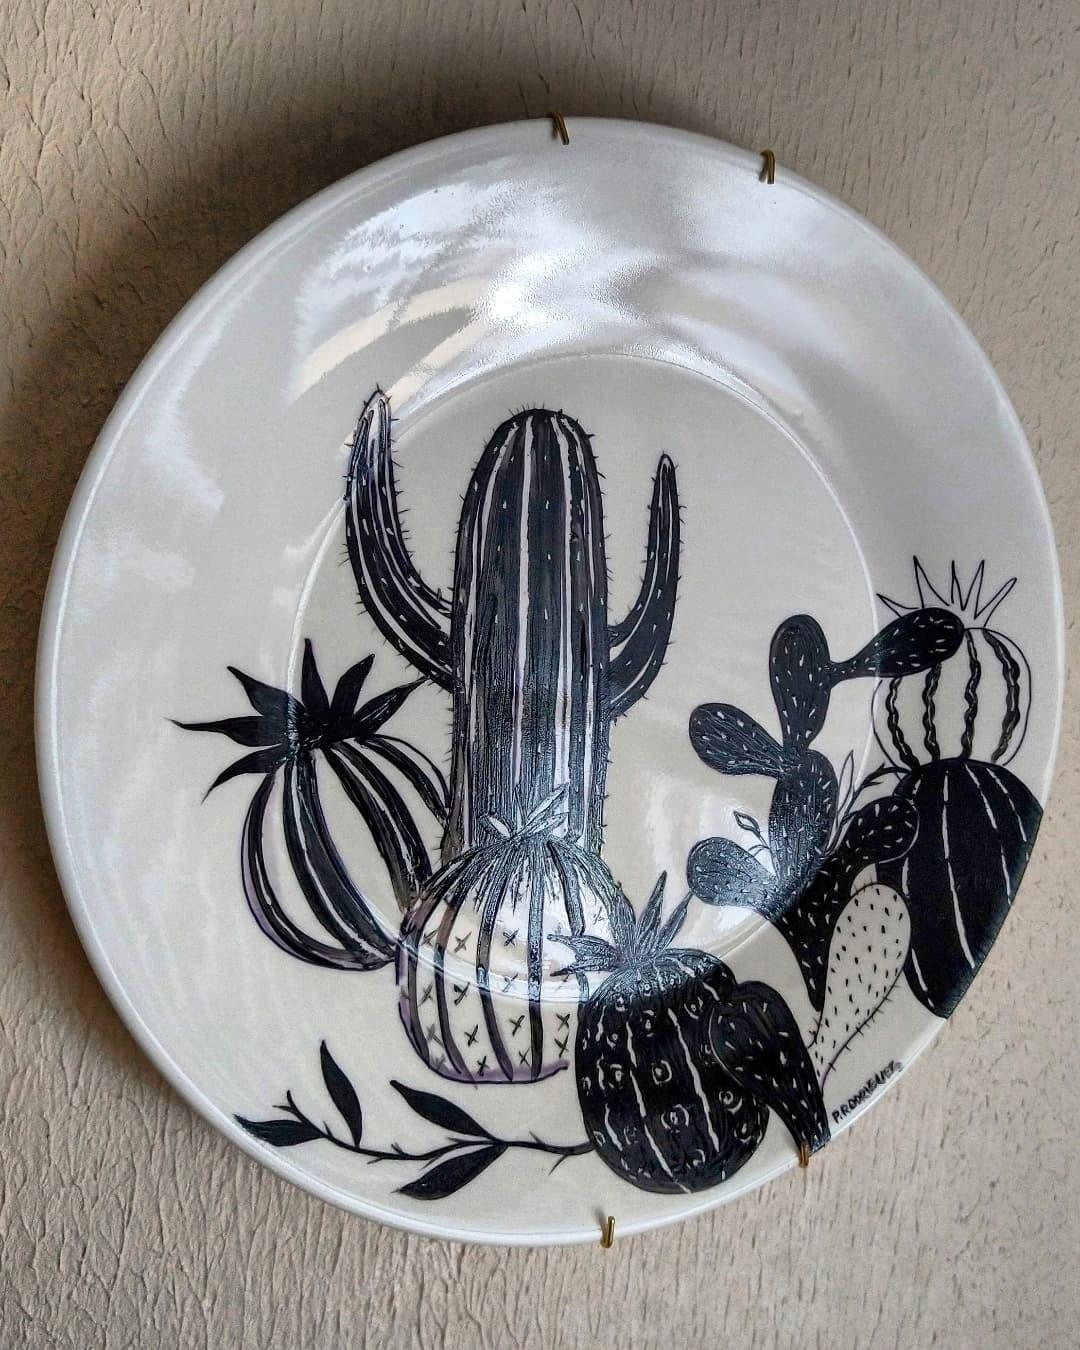 Pair of Prickly Plates